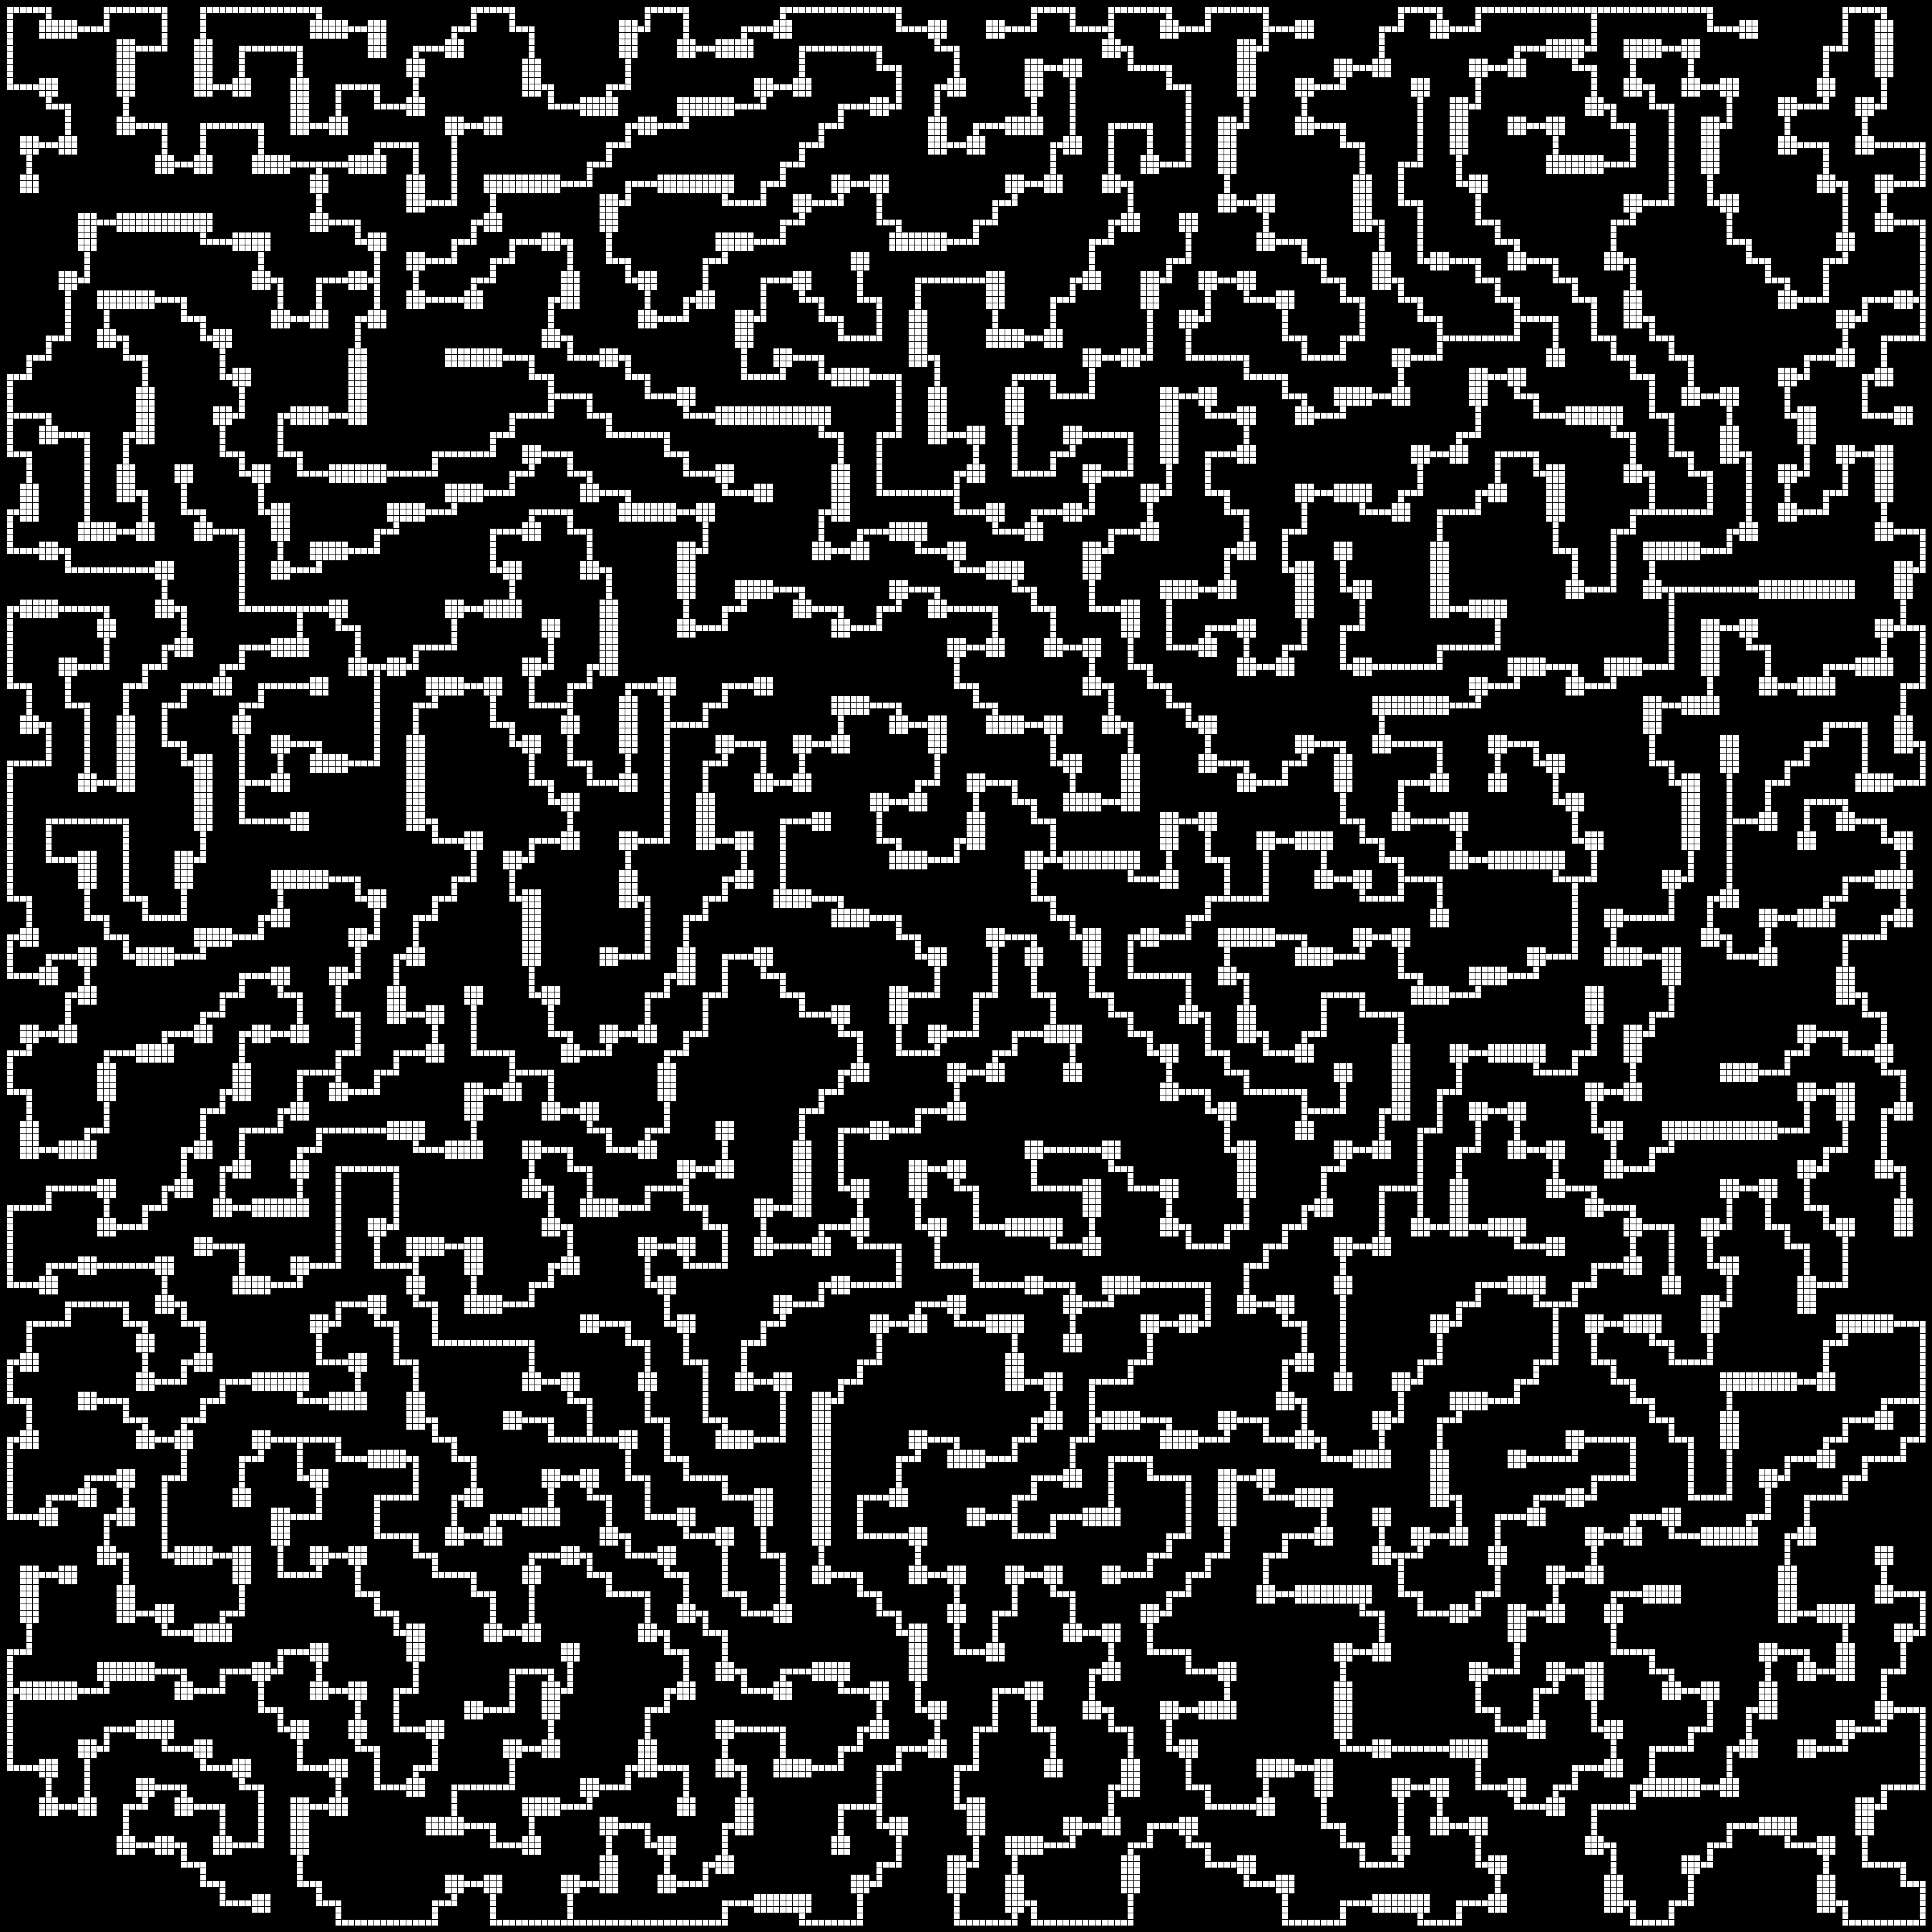 final sample, size is everything a 100x100 cells, which comes out to 3000px squared, nice and large, proof of concept, it works, sort of looks maze dungeonish